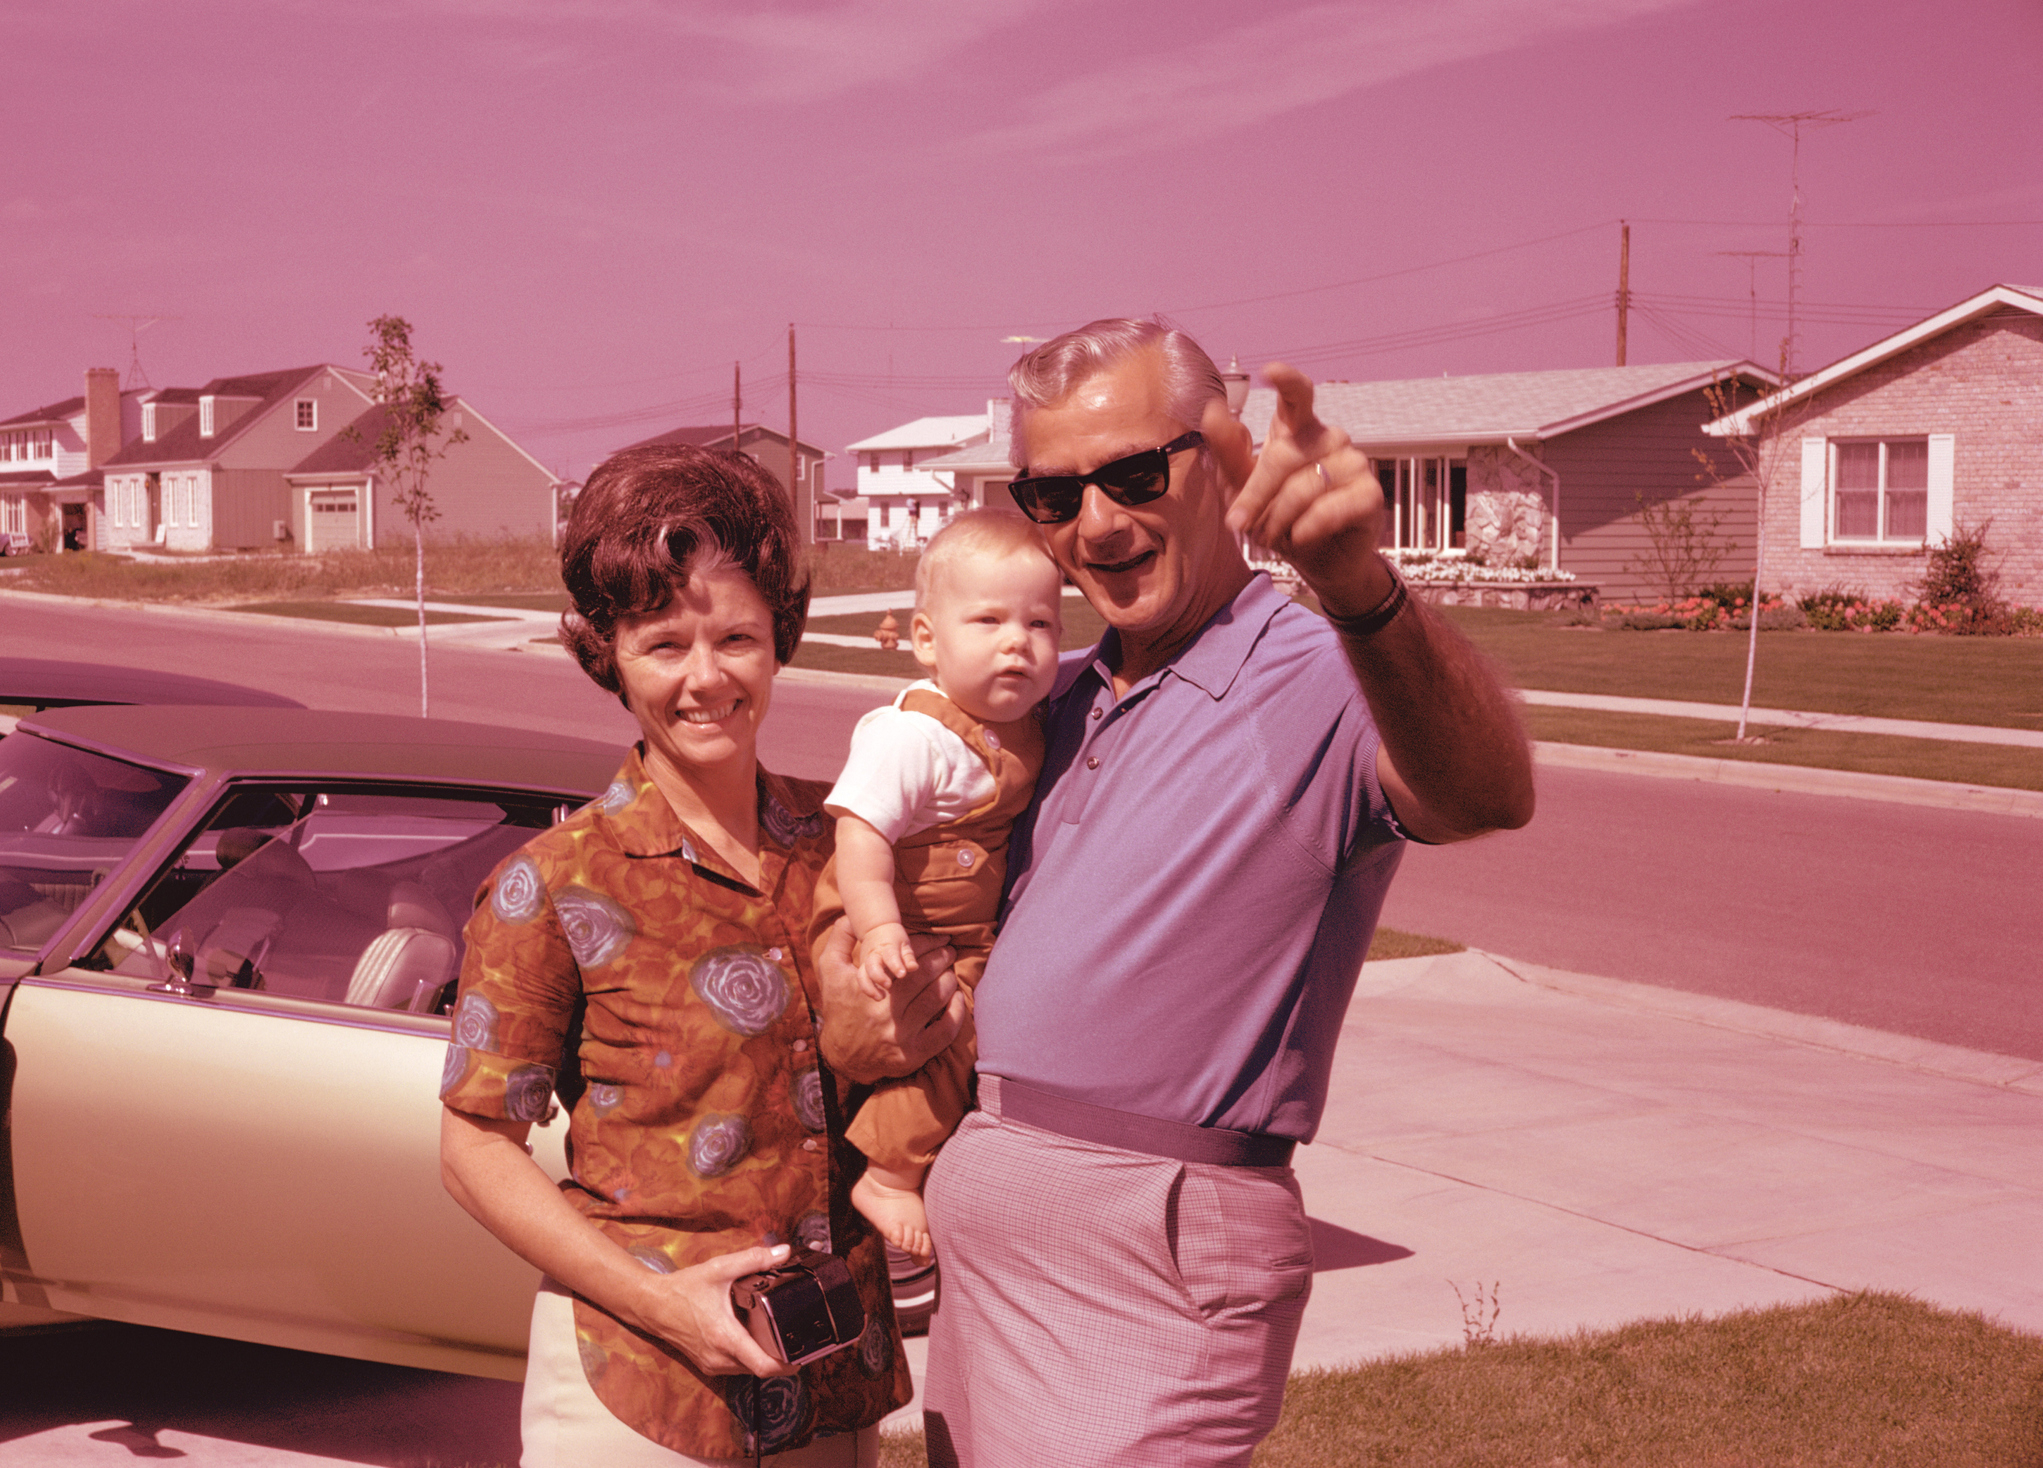 A vintage photo of a family with a baby, standing next to a classic car, smiling and waving at the camera